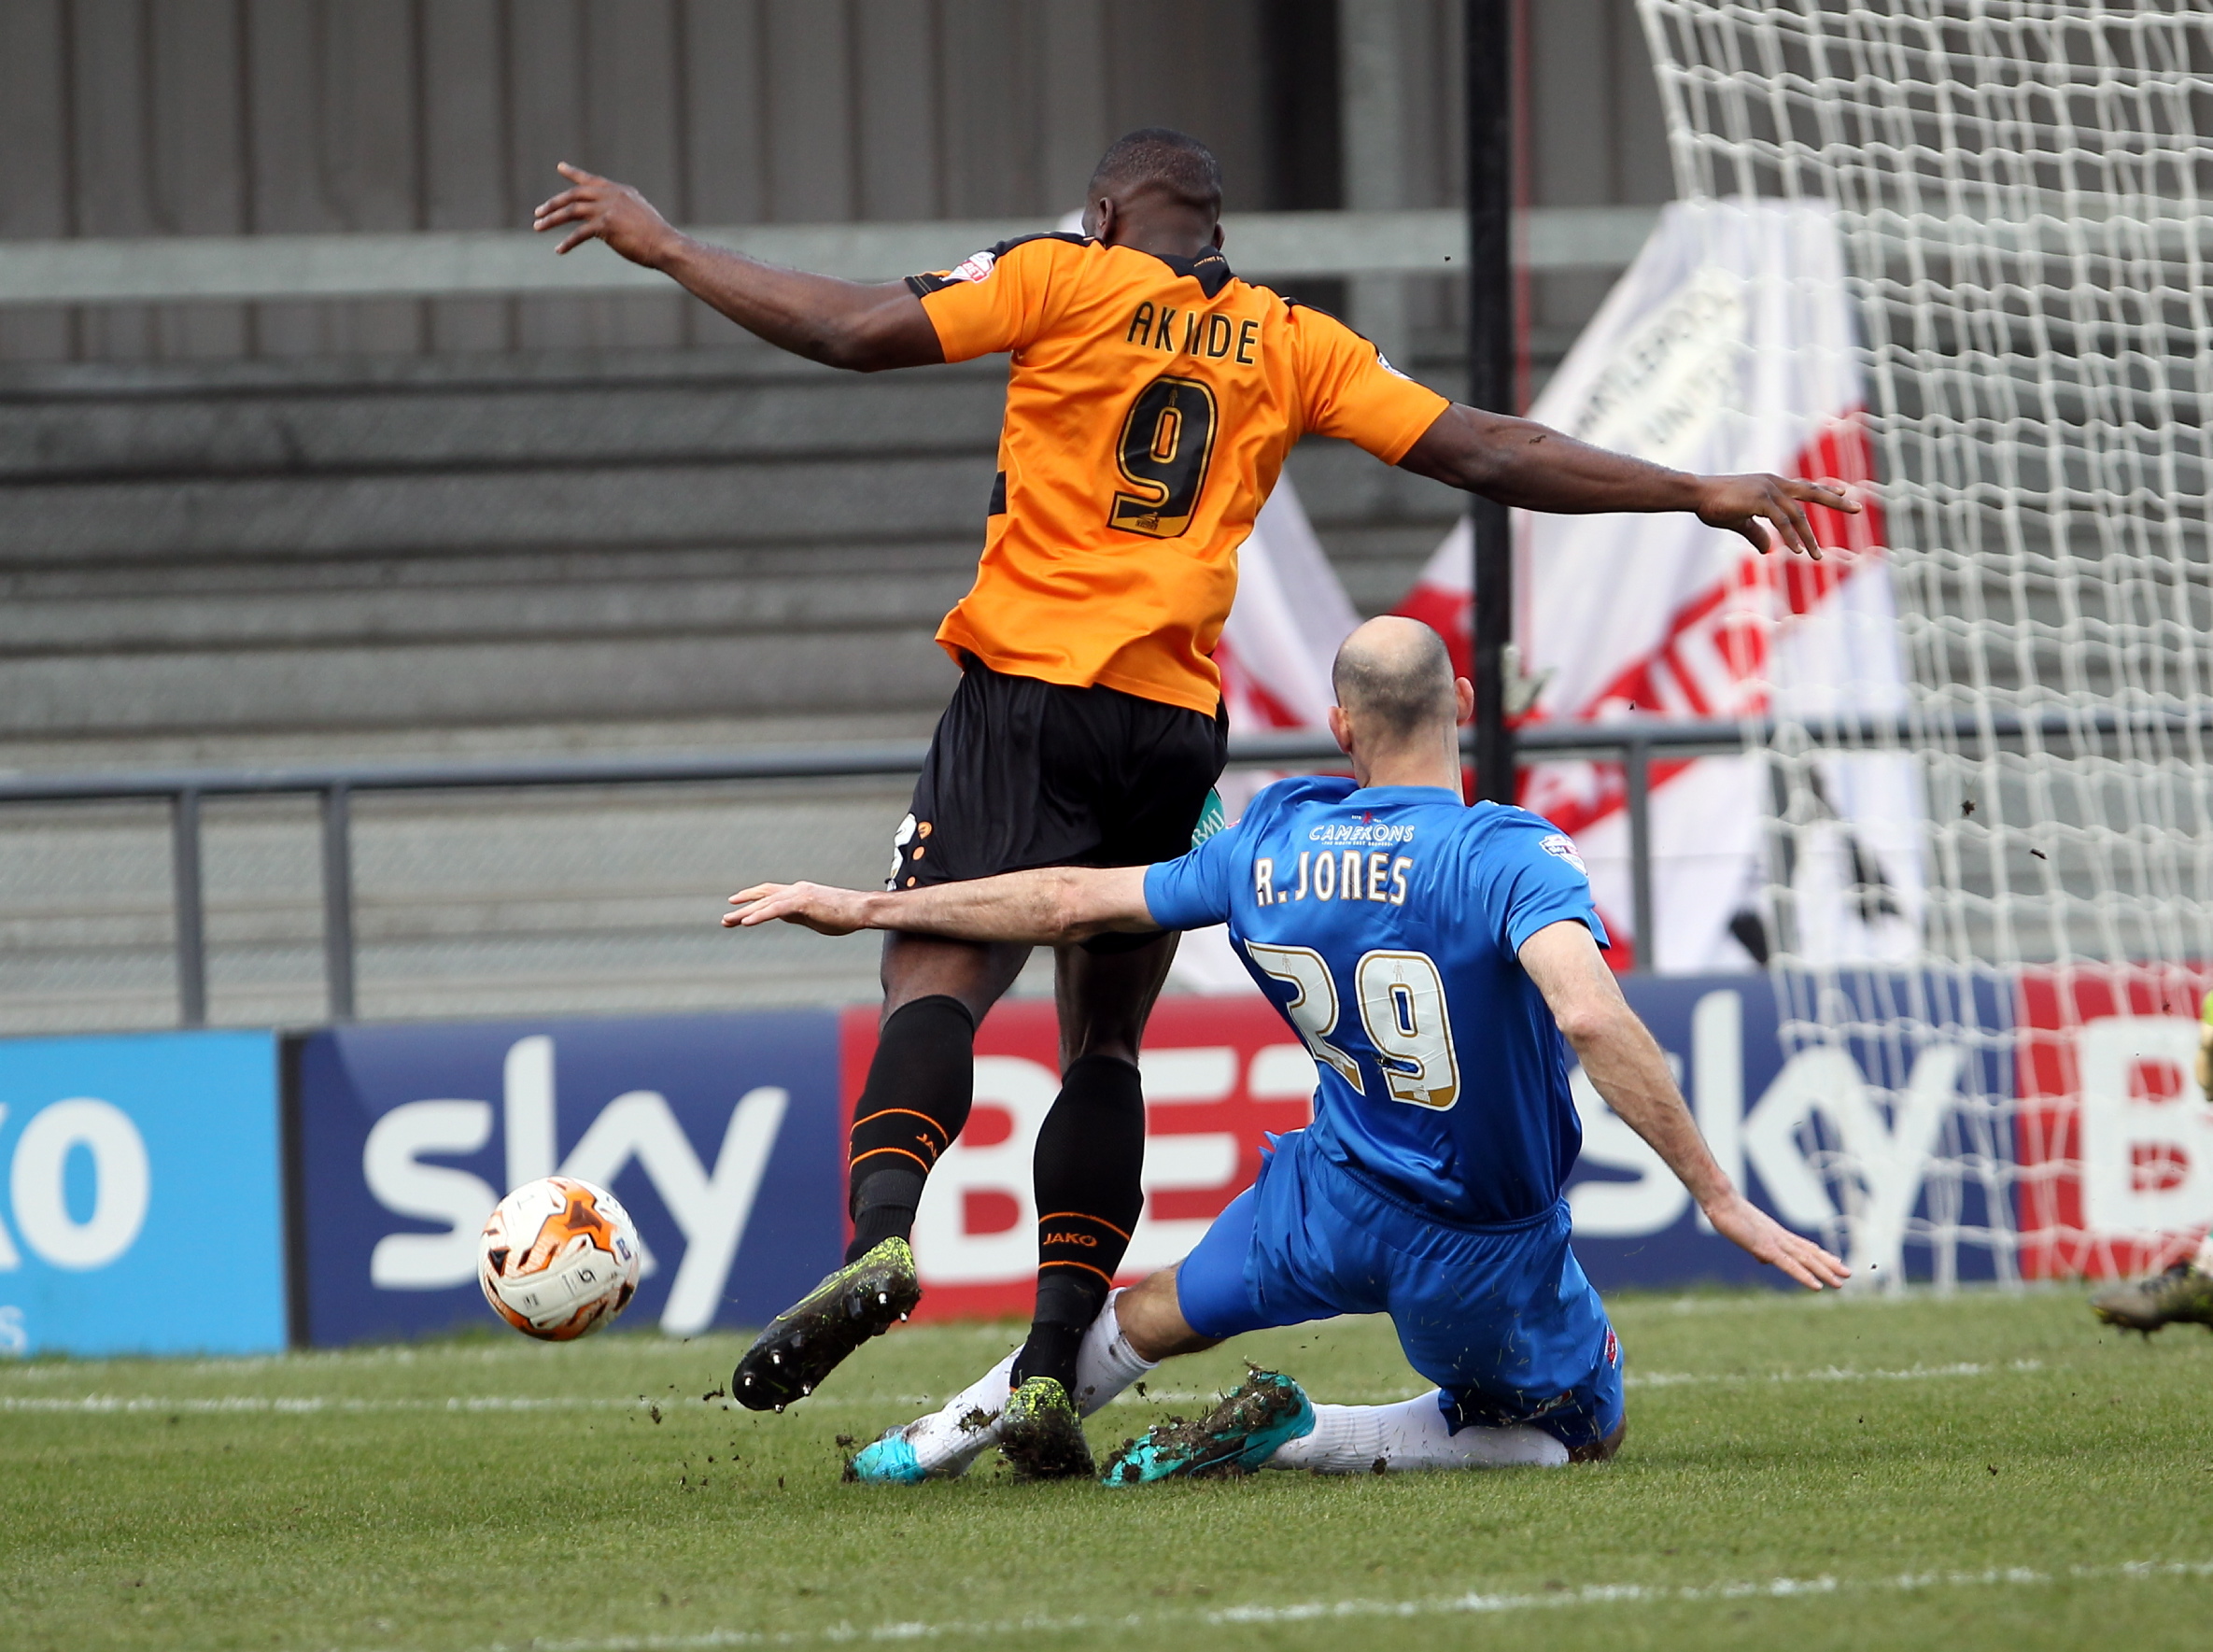 Barnet players "will be affected" by Allen departure, admits Akinde - Times Series